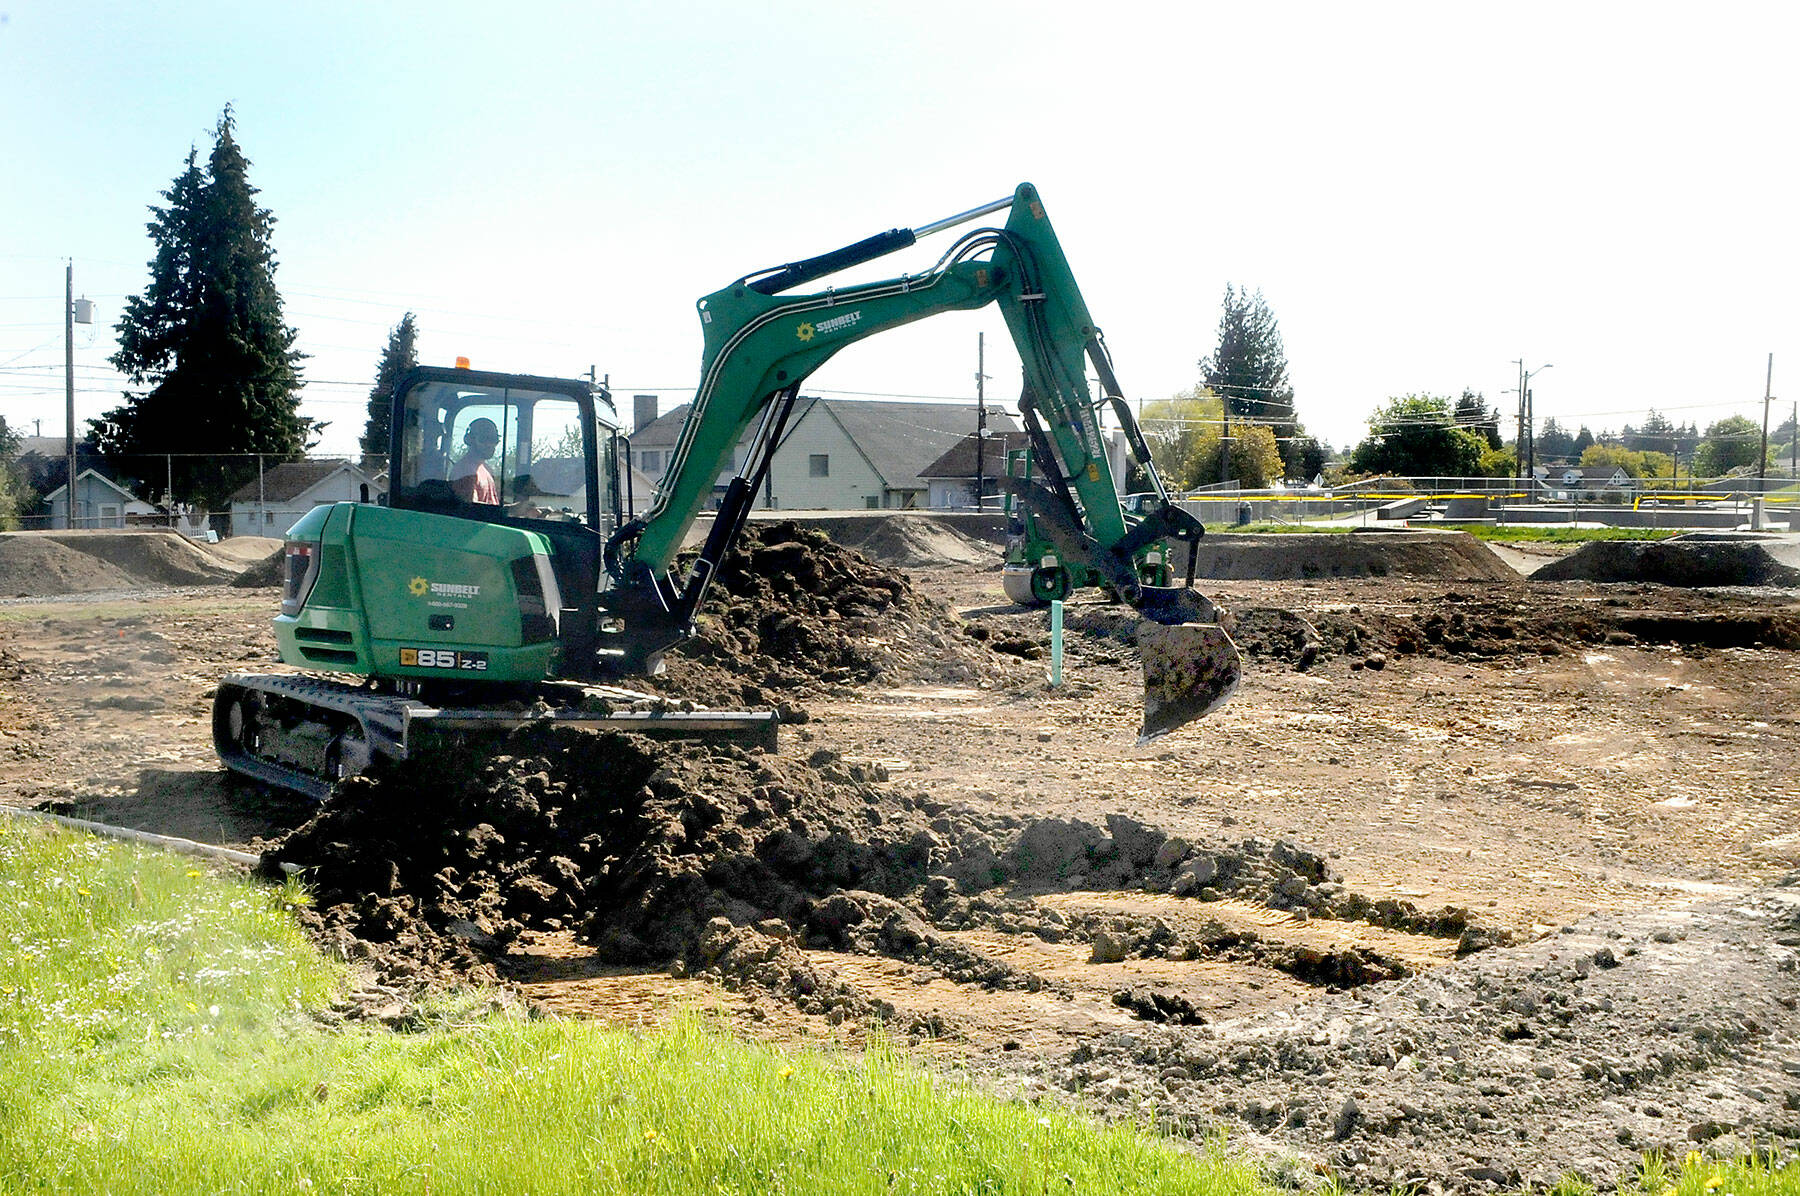 An excavator moves dirt on Thursday at the site of a pump track under construction at Erickson Playfield in Port Angeles. Volunteers are sought to help with asphalt installation from May 25 to June 1. (Keith Thorpe/Peninsula Daily News)